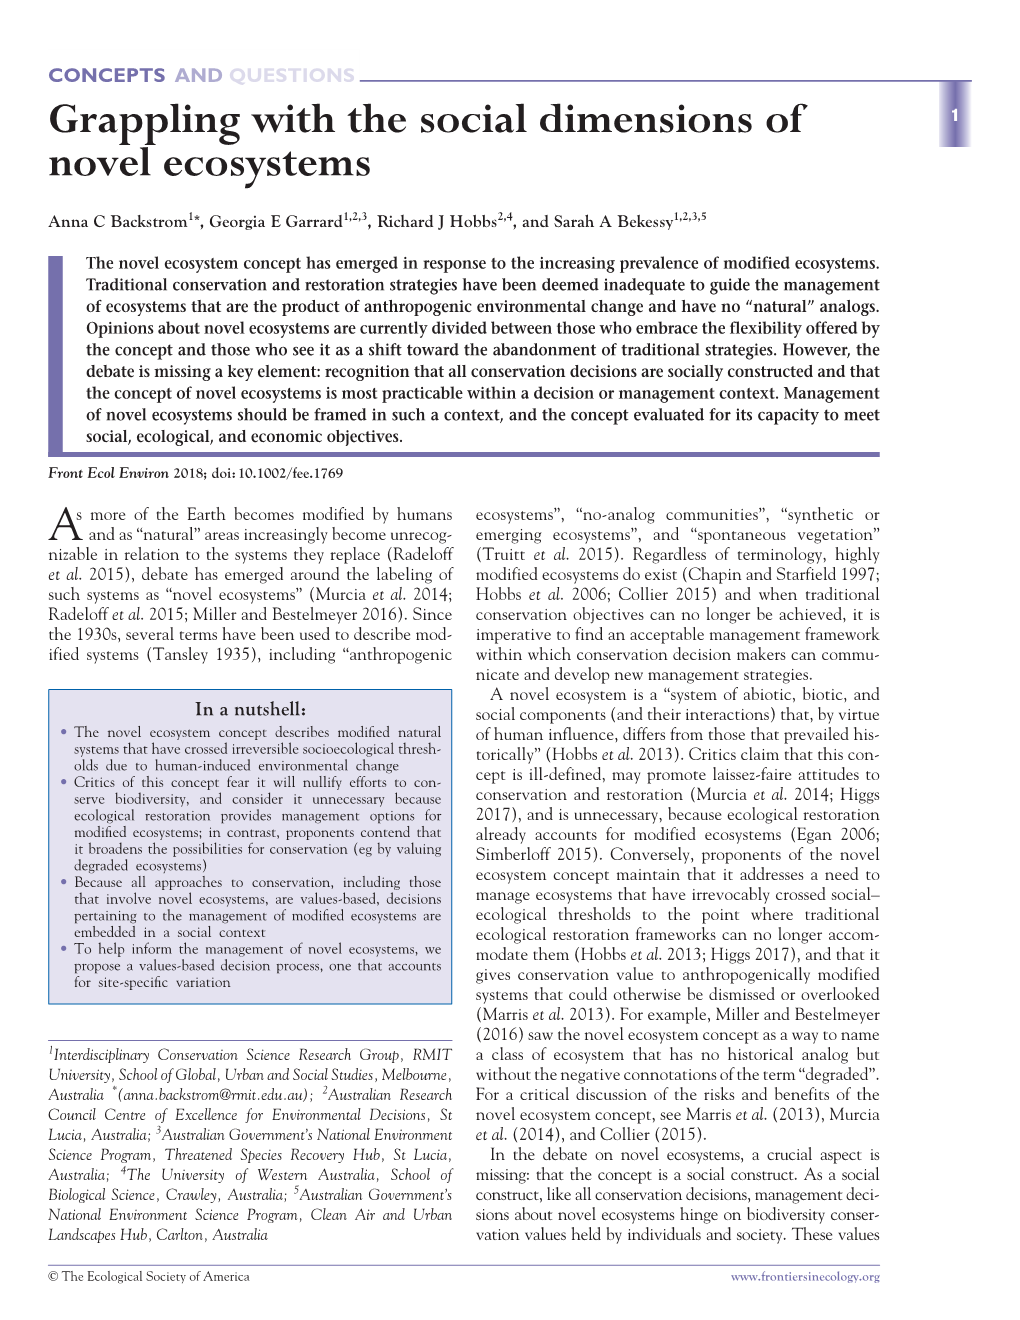 Grappling with the Social Dimensions of Novel Ecosystems